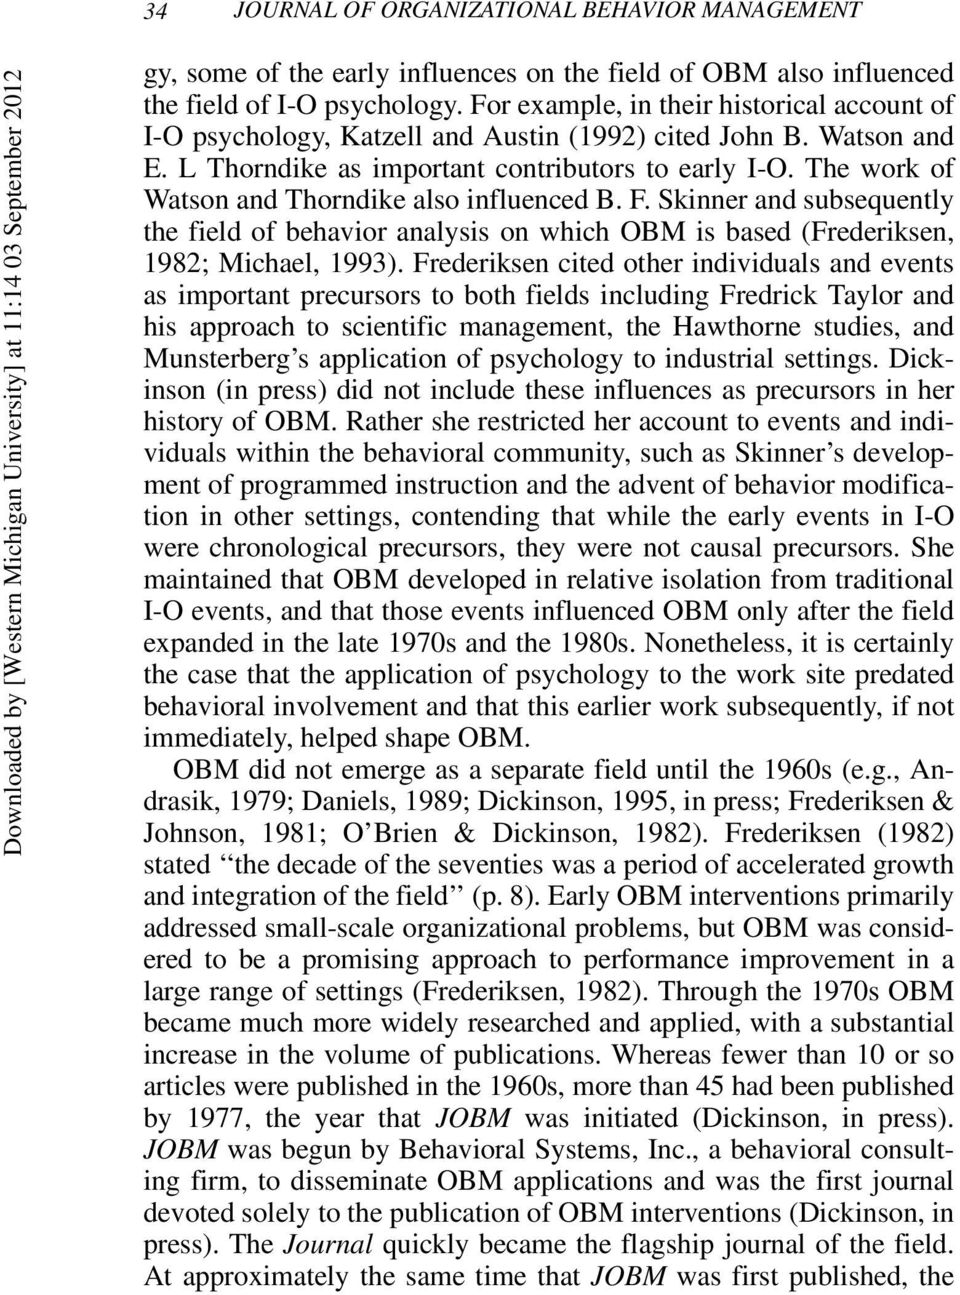 The work of Watson and Thorndike also influenced B. F. Skinner and subsequently the field of behavior analysis on which OBM is based (Frederiksen, 1982; Michael, 1993).